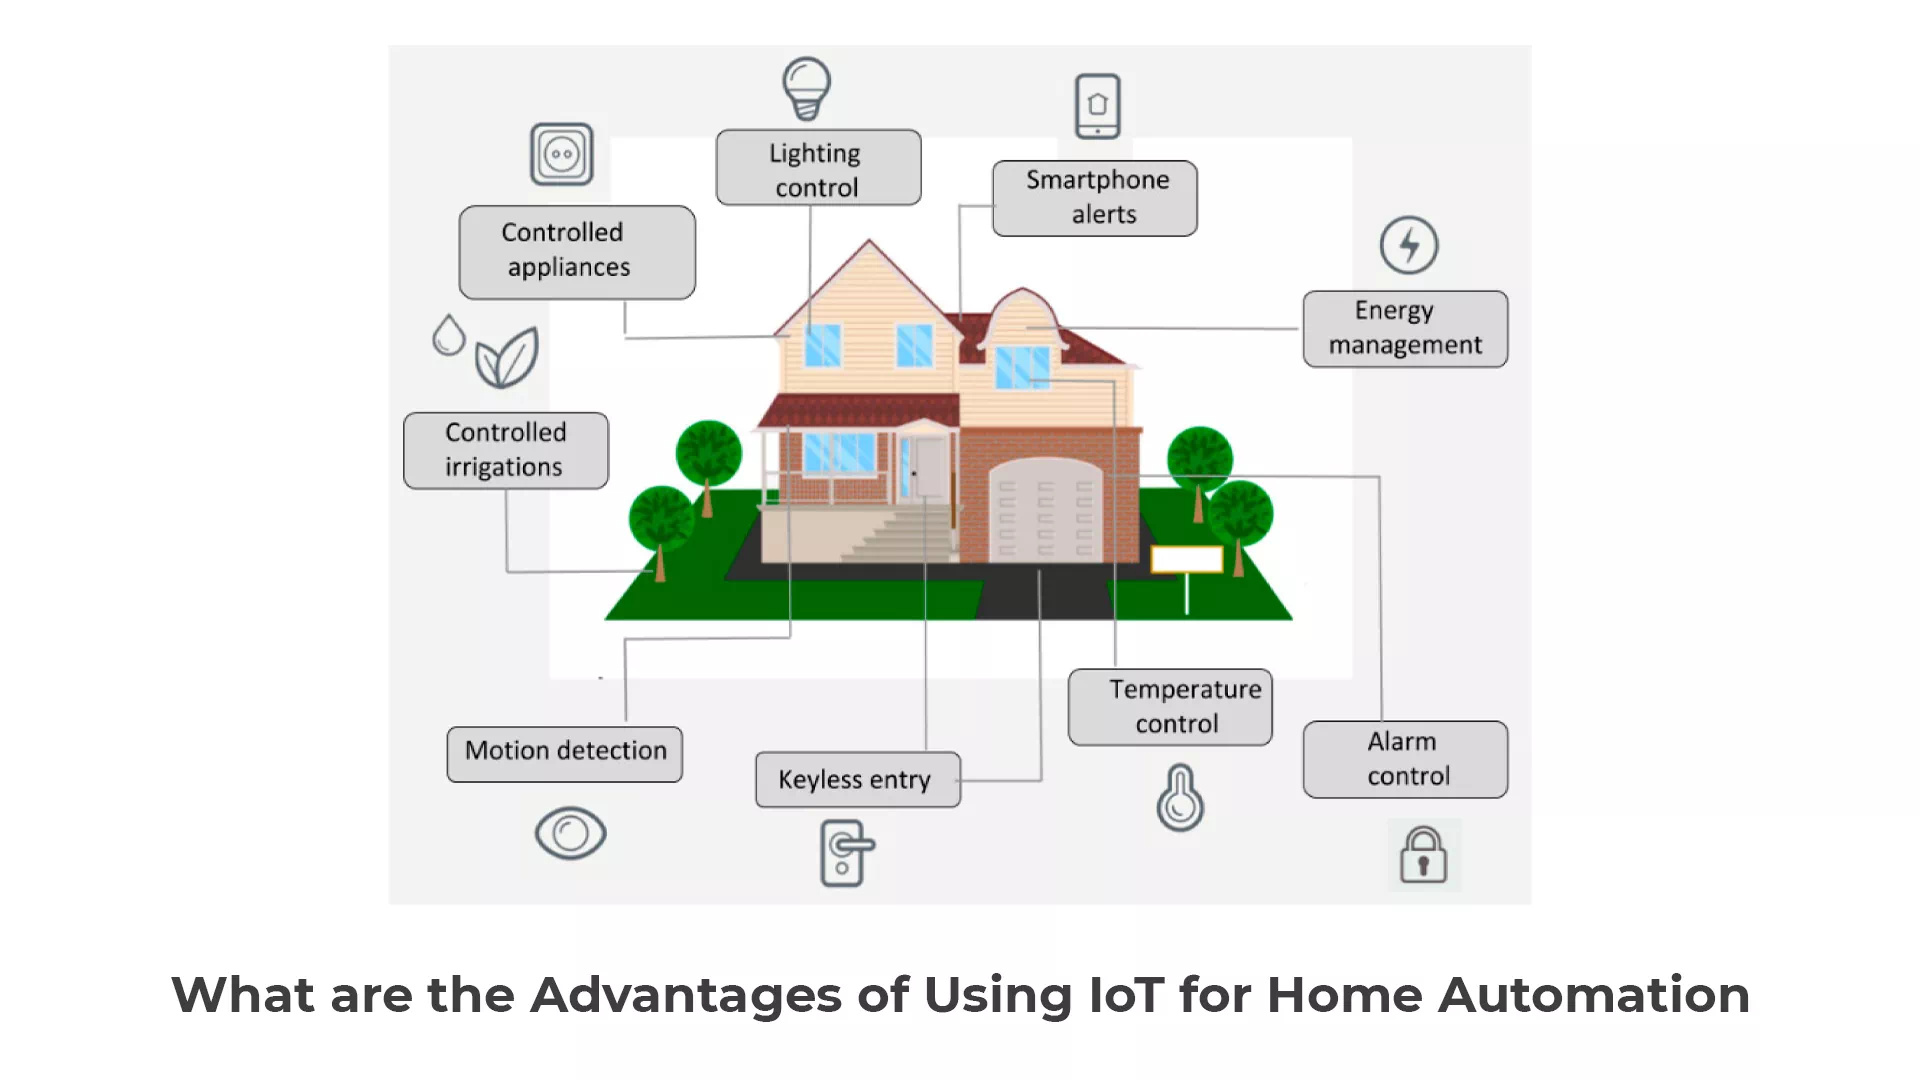 What are the Advantages of Using IoT for Home Automation